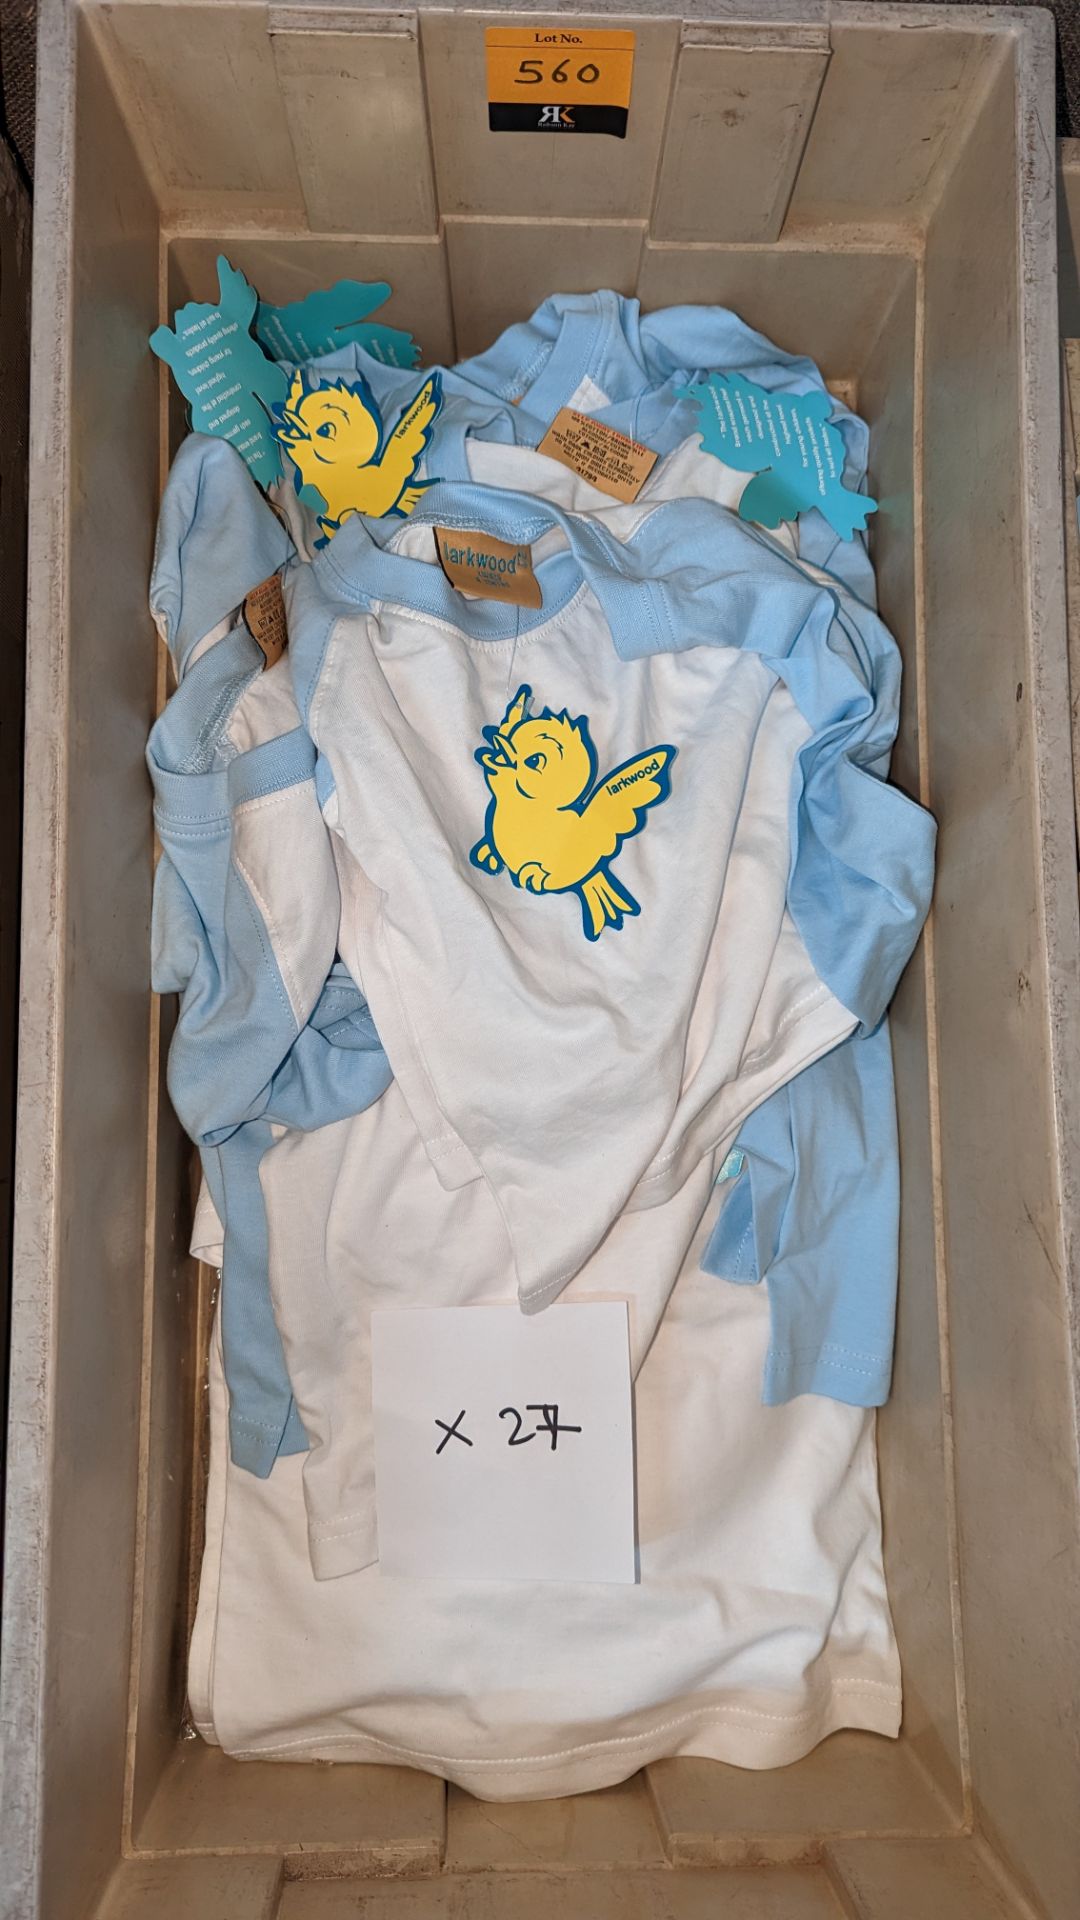 27 off Larkwood baby's long sleeve t-shirts each with white body & blue sleeves in assorted sizes - - Image 3 of 3